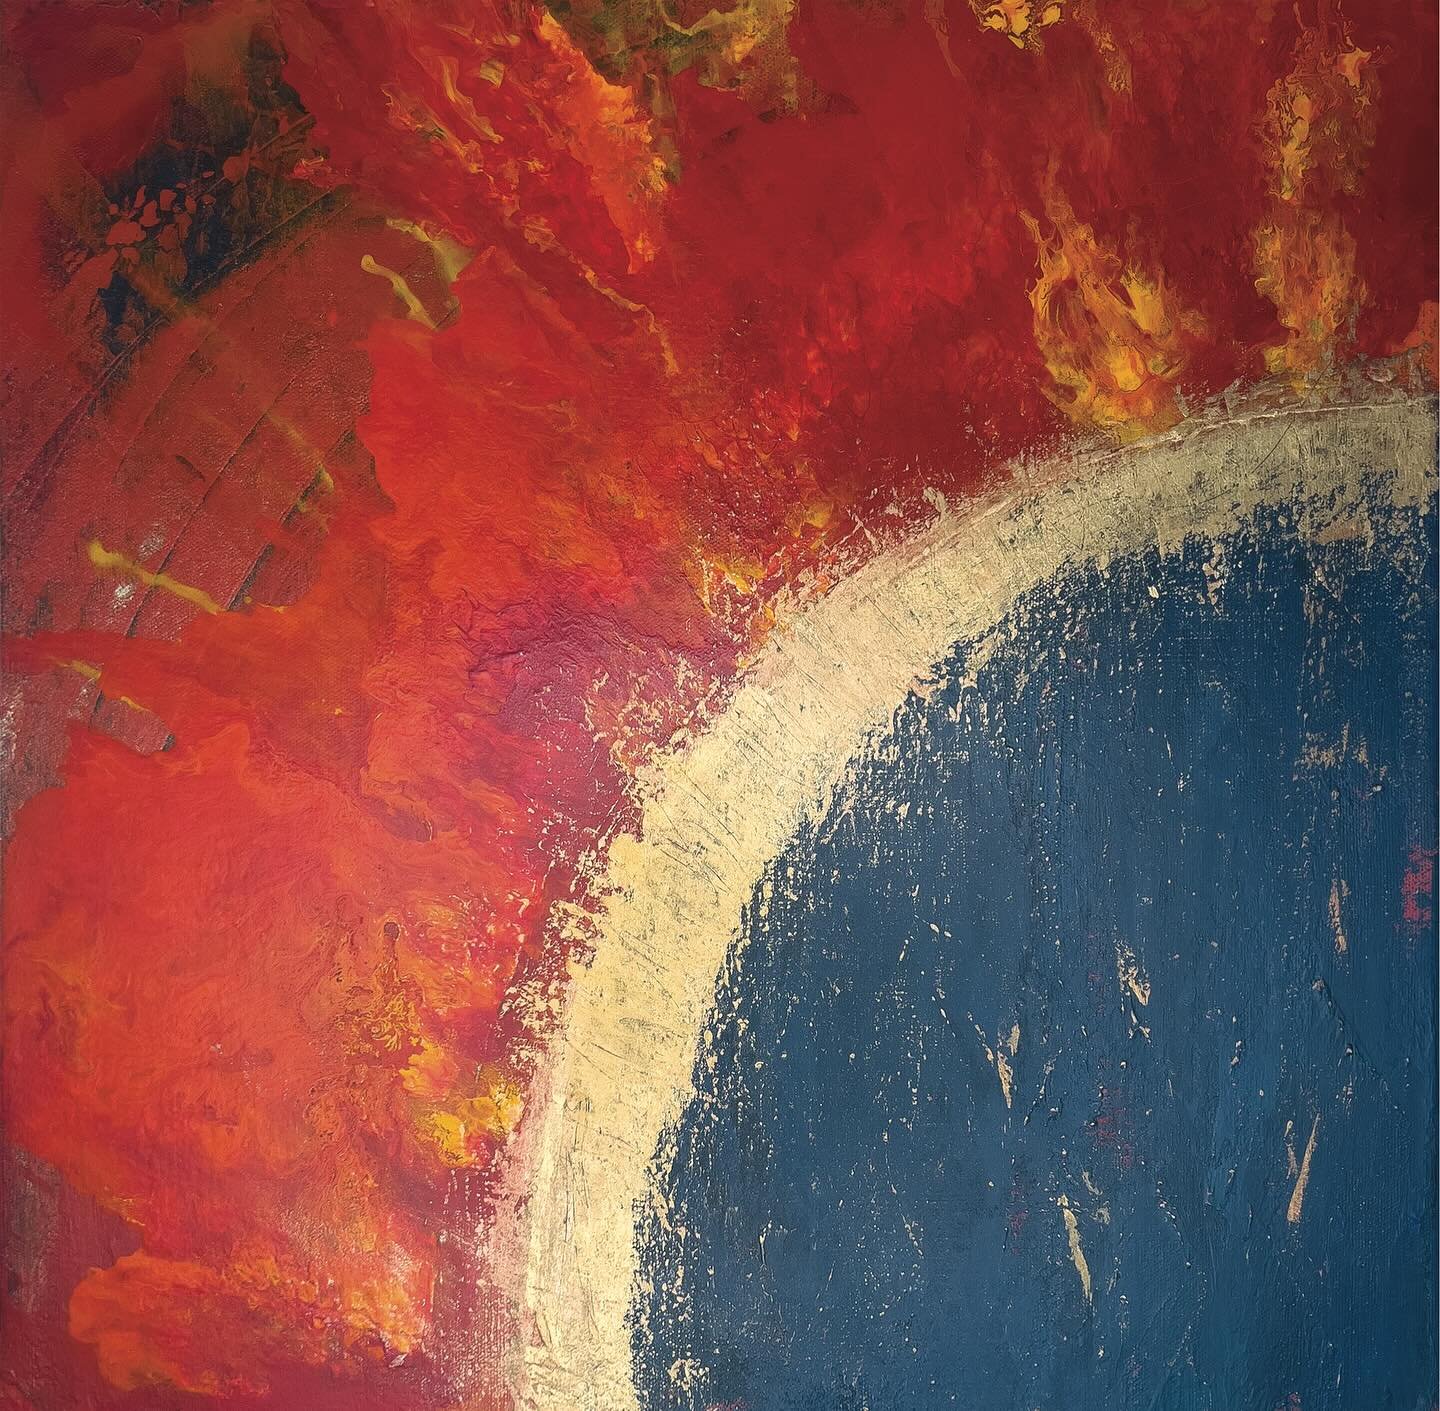 Today is Pentecost Sunday, which marks the birth of the Christian Church more than 2,000 years ago. I&rsquo;ve painted on this subject before, but never like this! I wanted viewers to experience the intensity of the moment the Spirit descended with a